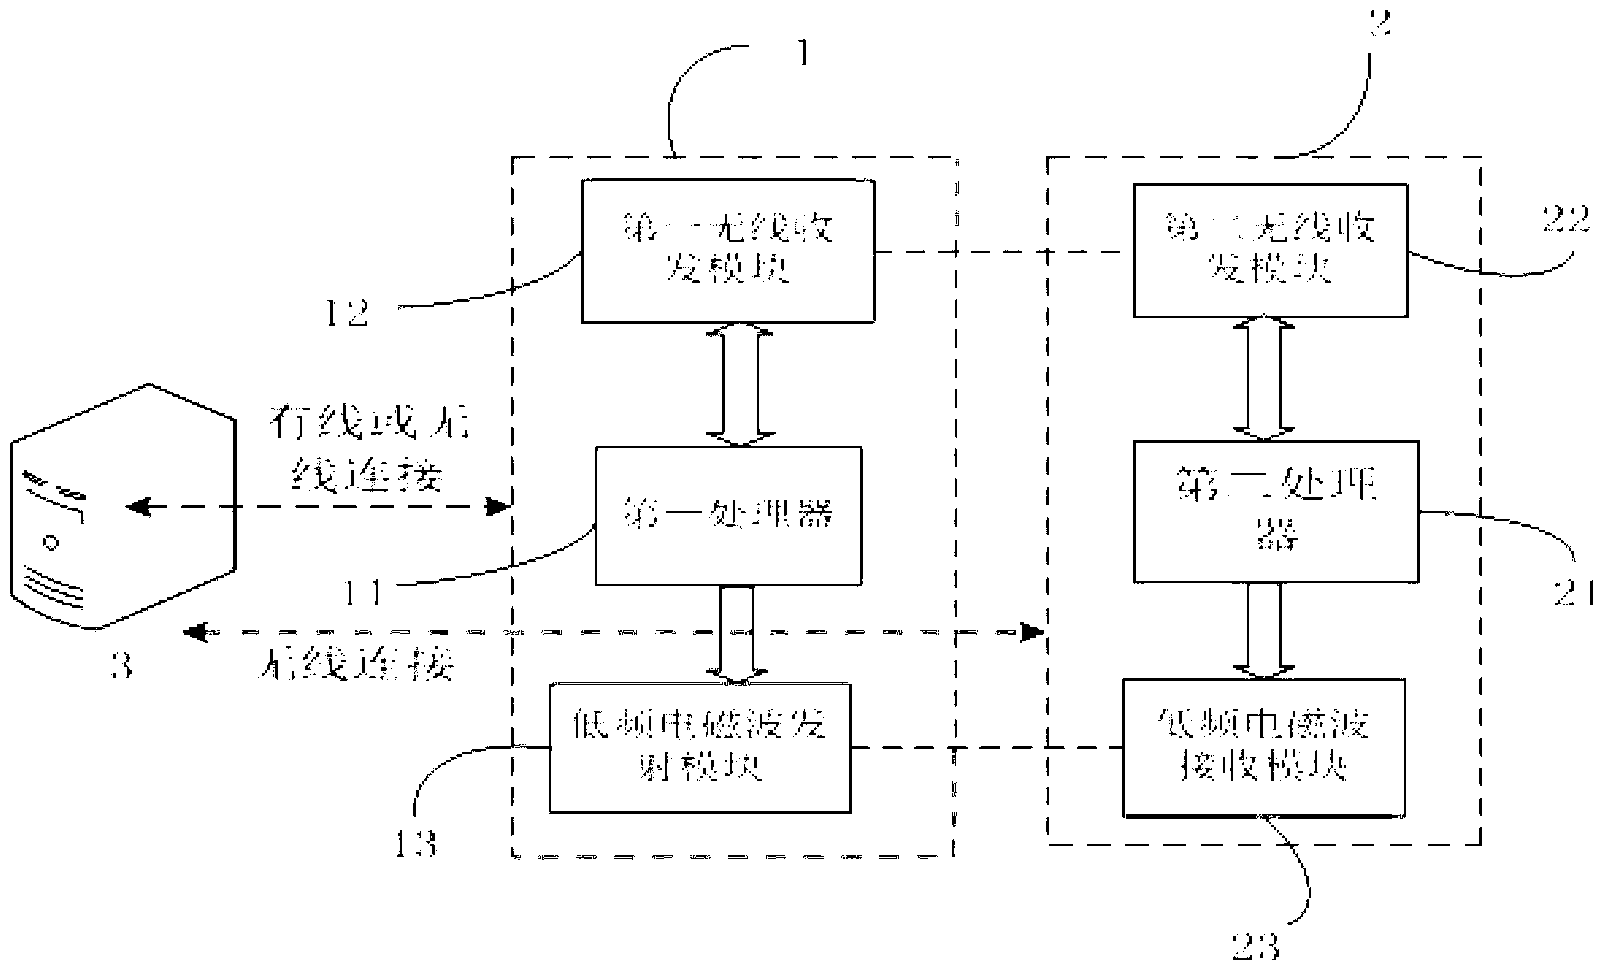 Target location and tracking system and method based on low-frequency electromagnetic wave